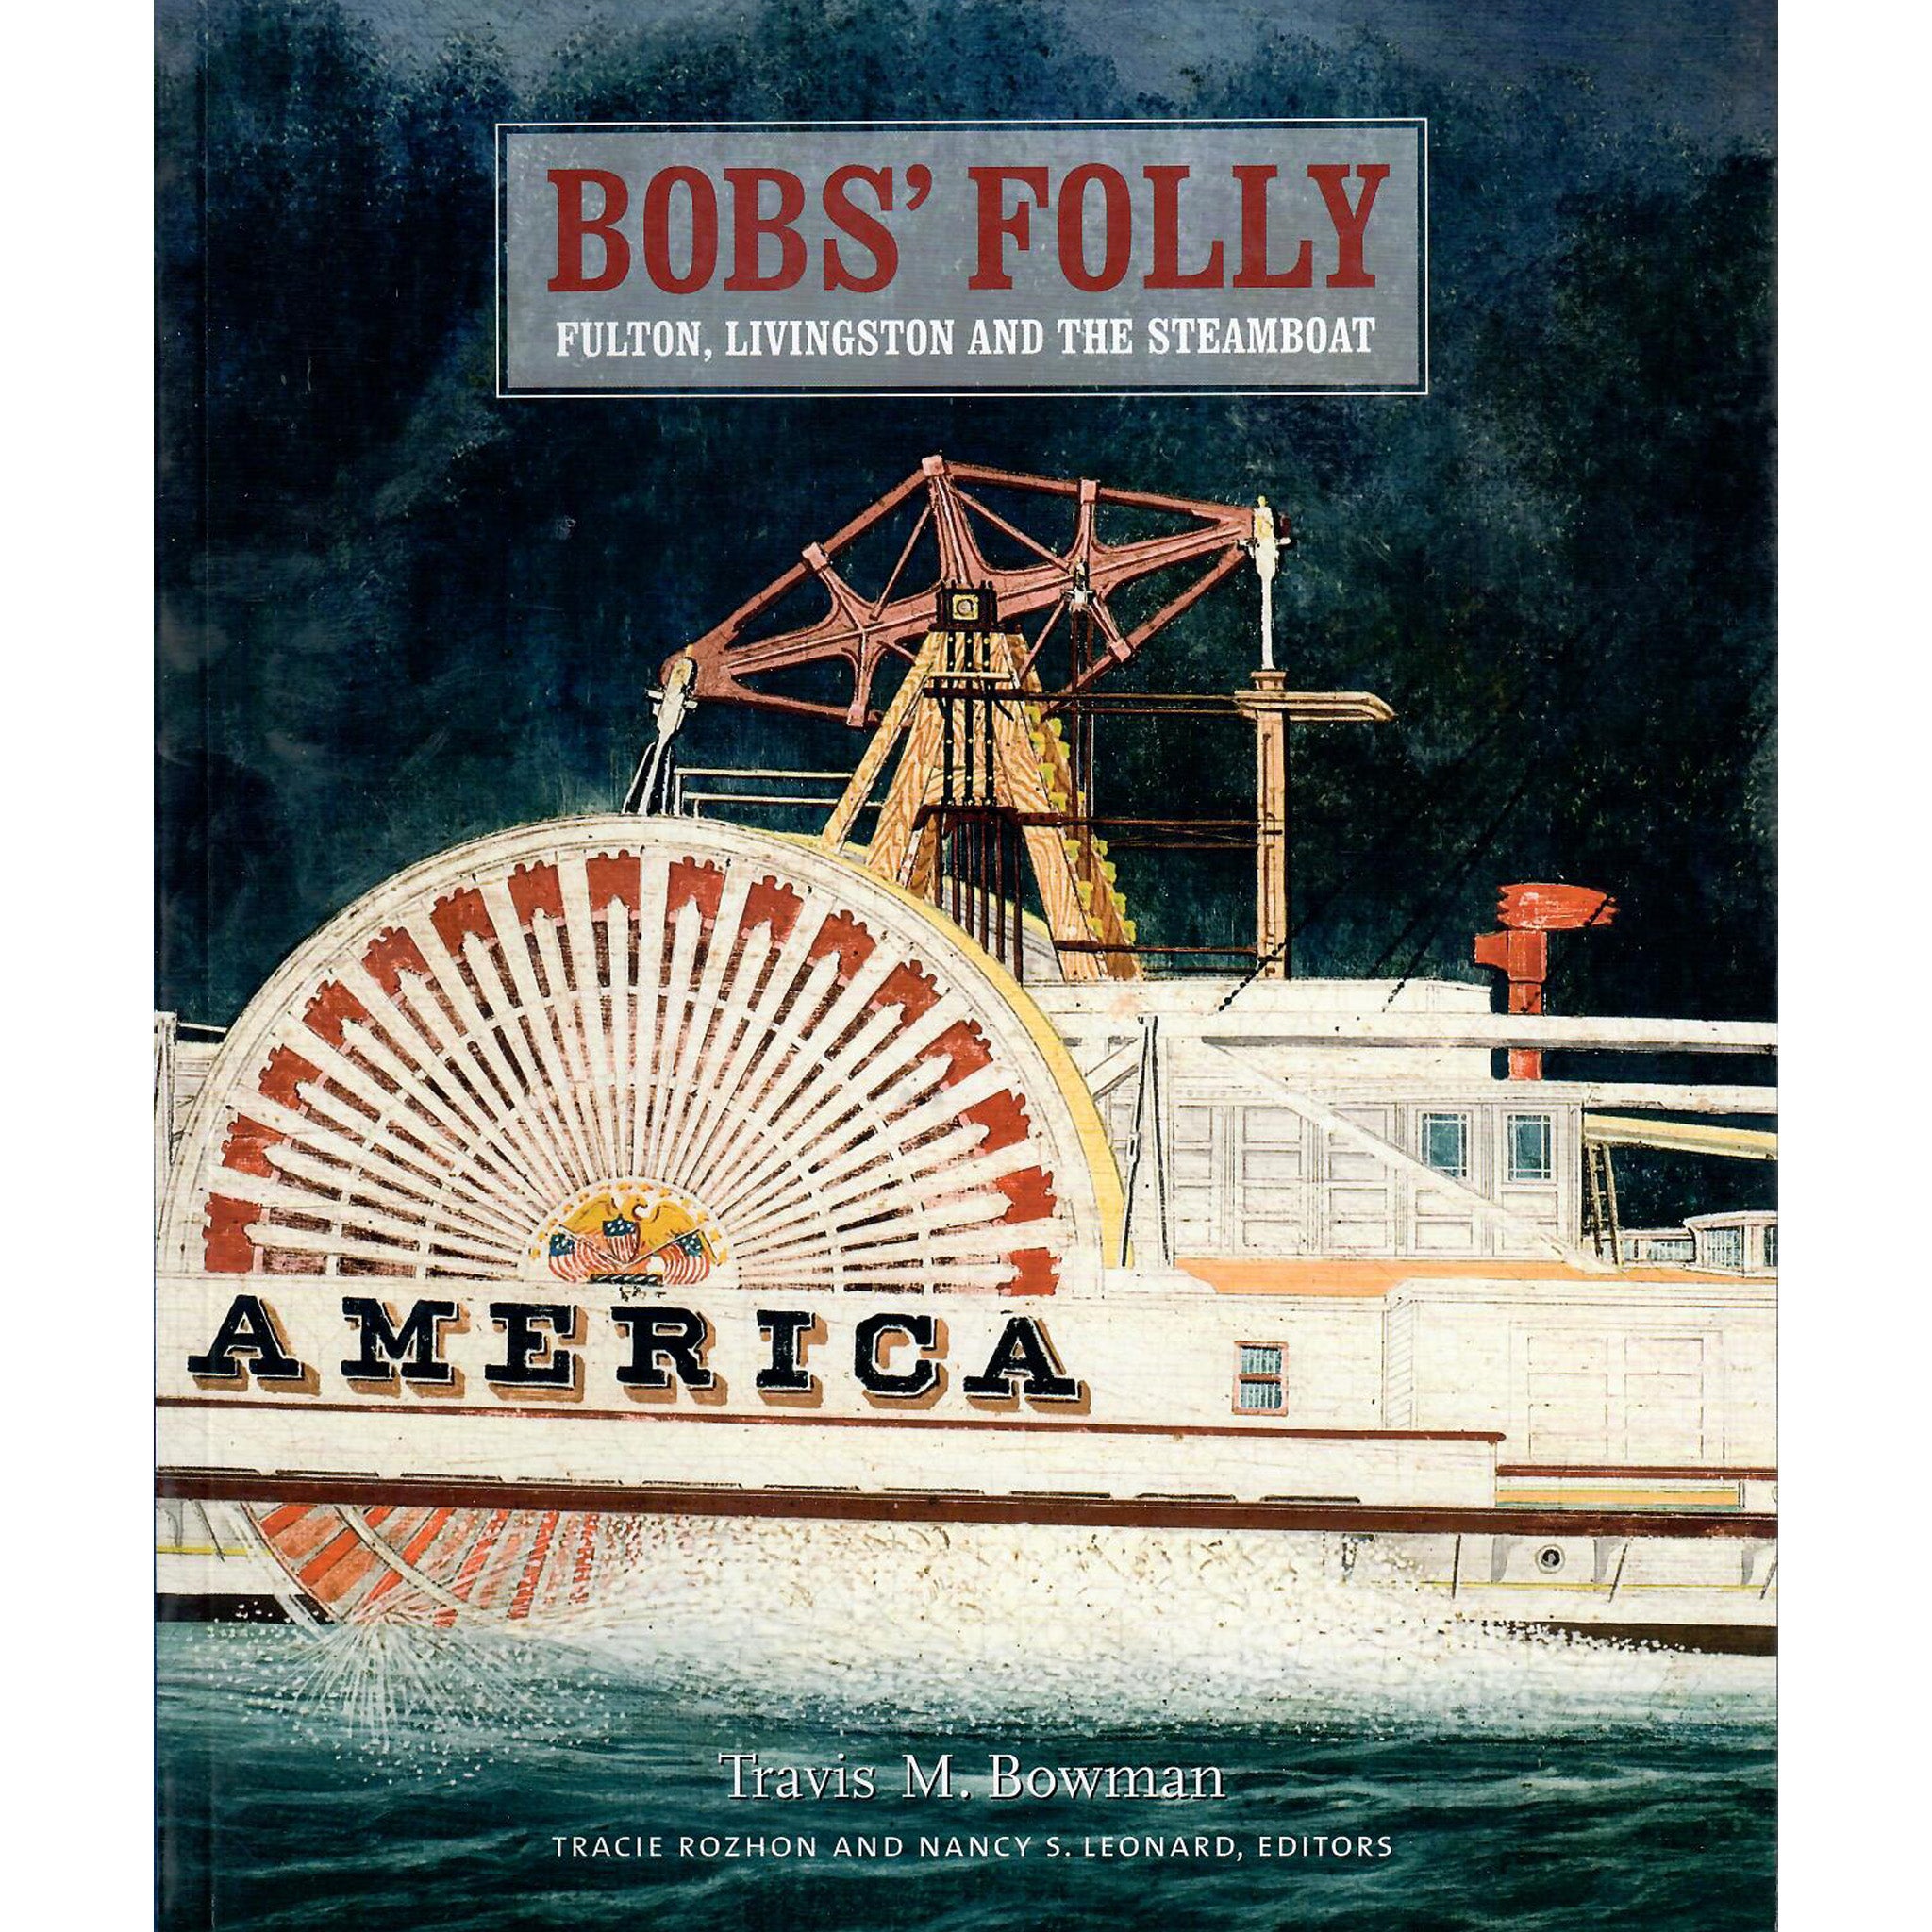 Bobs' Folly: Fulton, Livingston and the Steamboat